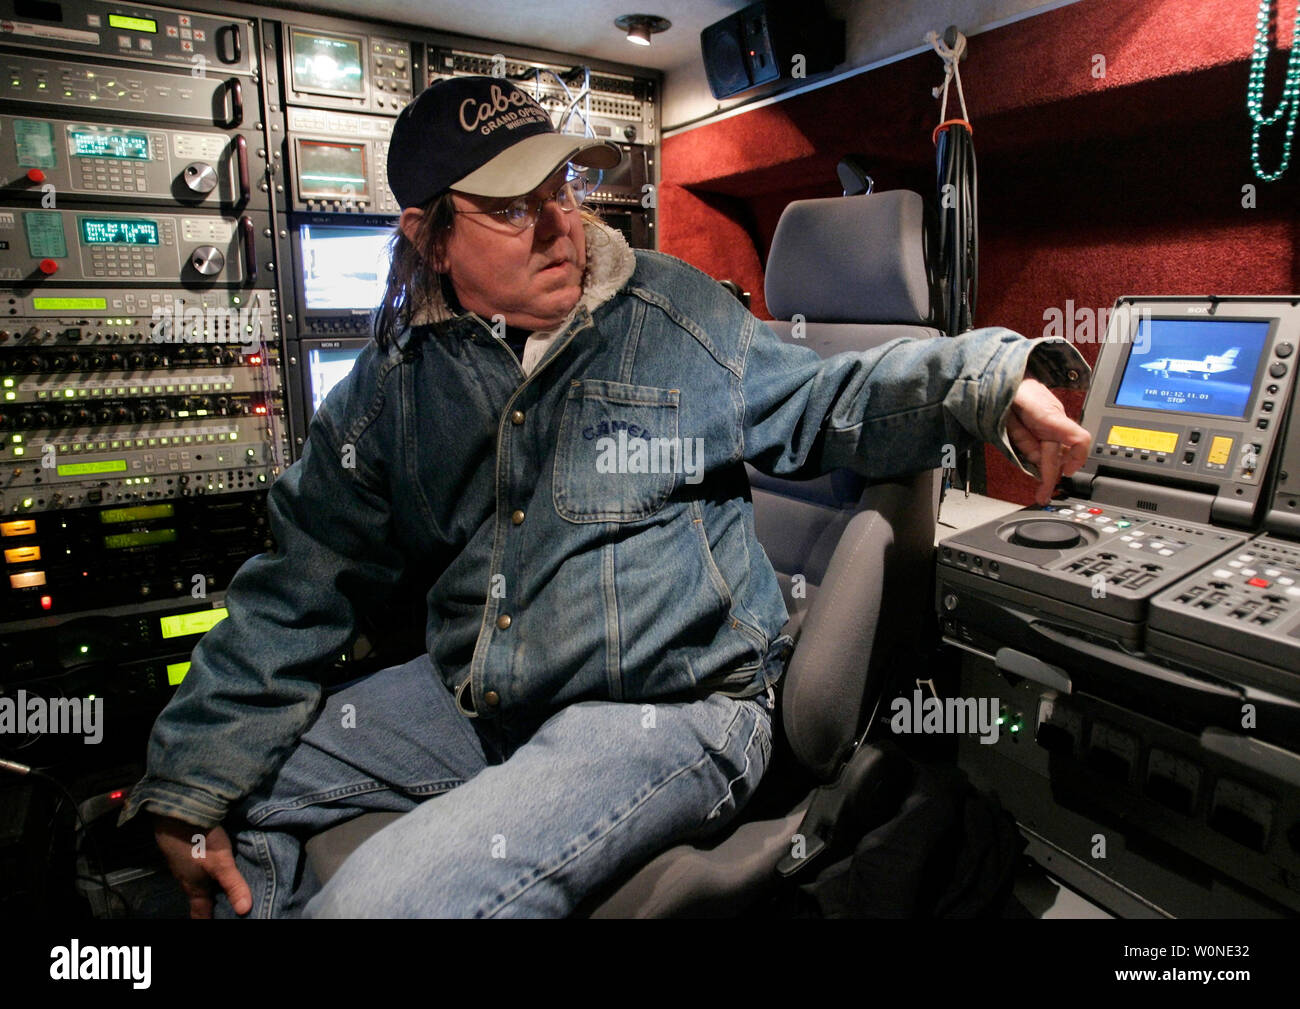 Engineer Brian McConnaughey handles the live truck operations for ABC News following Martha Stewart's release from prison on Friday, March 4, 2005 at the Greenbrier Valley Airport in Lewisburg, West Virginia.  Stewart boarded a plane bound for Bedford, New York (shown on the monitor) soon after being released from the Federal Prison Camp in Alderson, West Virginia at 12:30 a.m. EST.  (UPI Photo/Billy Suratt) Stock Photo